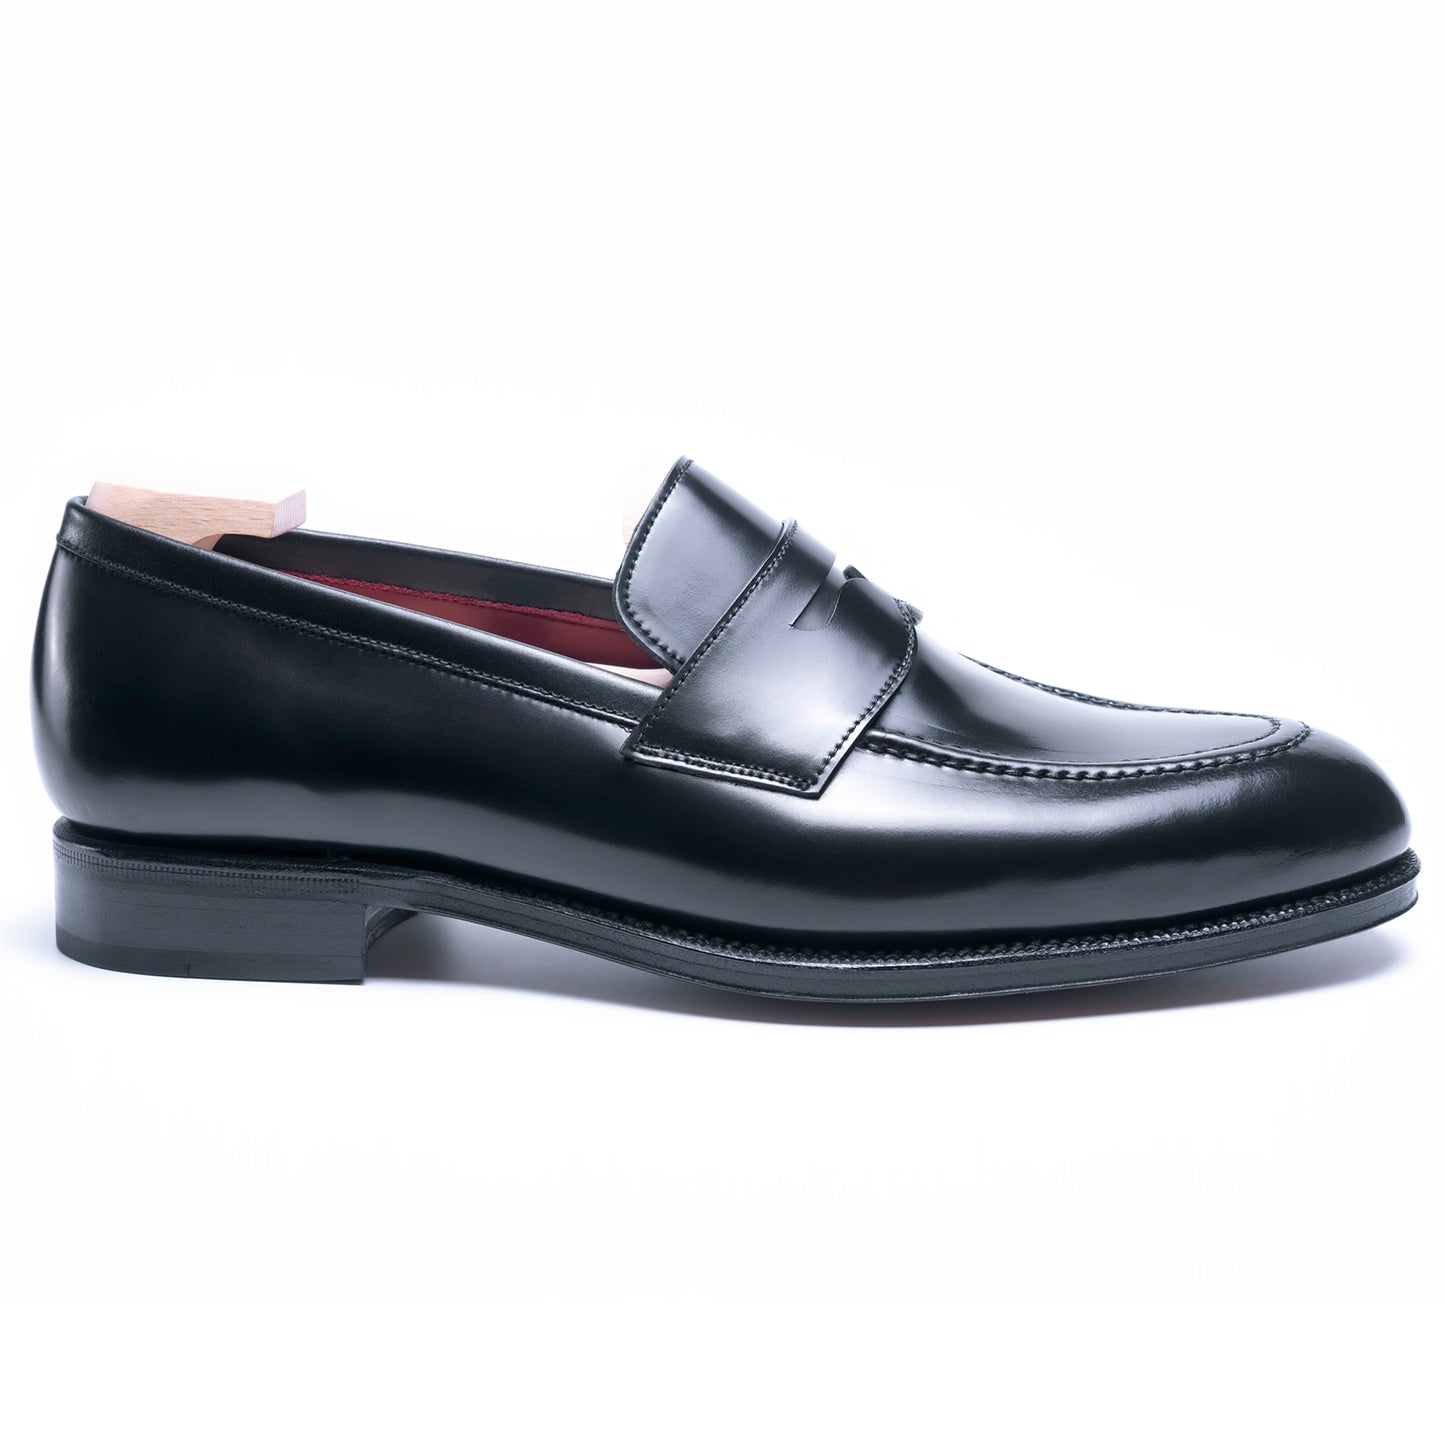 TLB Mallorca leather shoes - Men's Oxford shoes - Cordovan